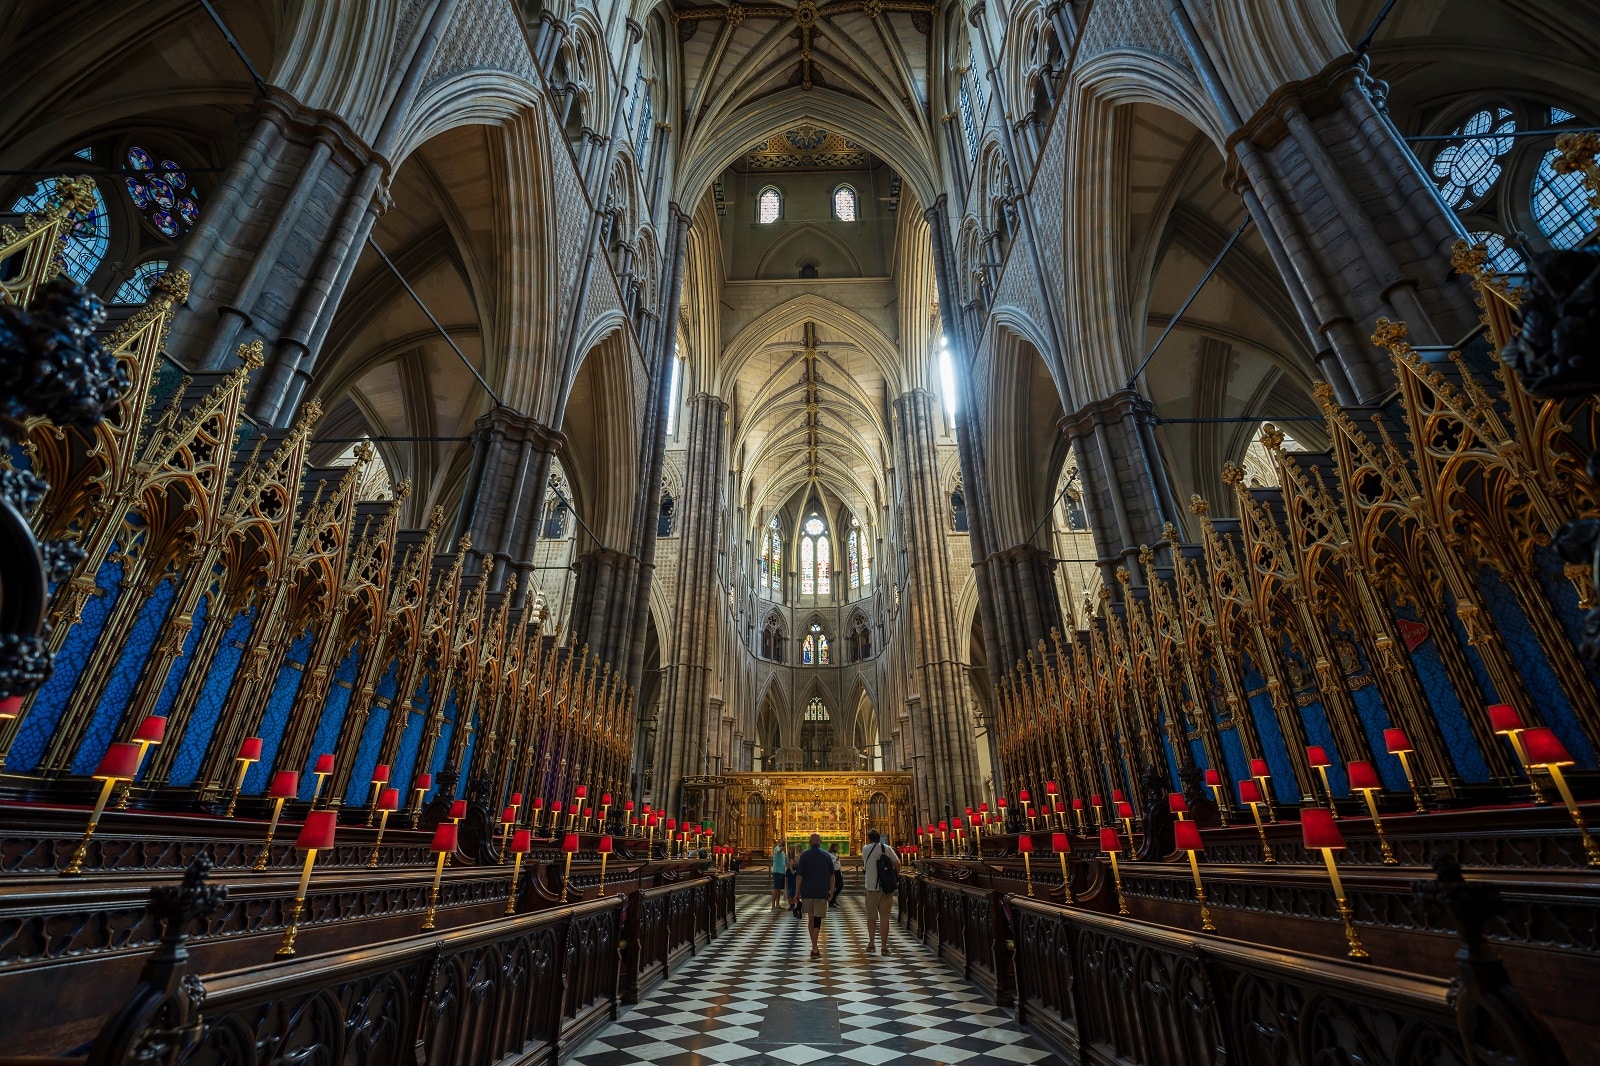 Image Credit: Shutterstock / Old Town Tourist <p><span>The Church of England has failed to commit to a £1 billion target to address its historical financial connections to the slave trade, after facing criticism for initially pledging £100 Million. </span></p>